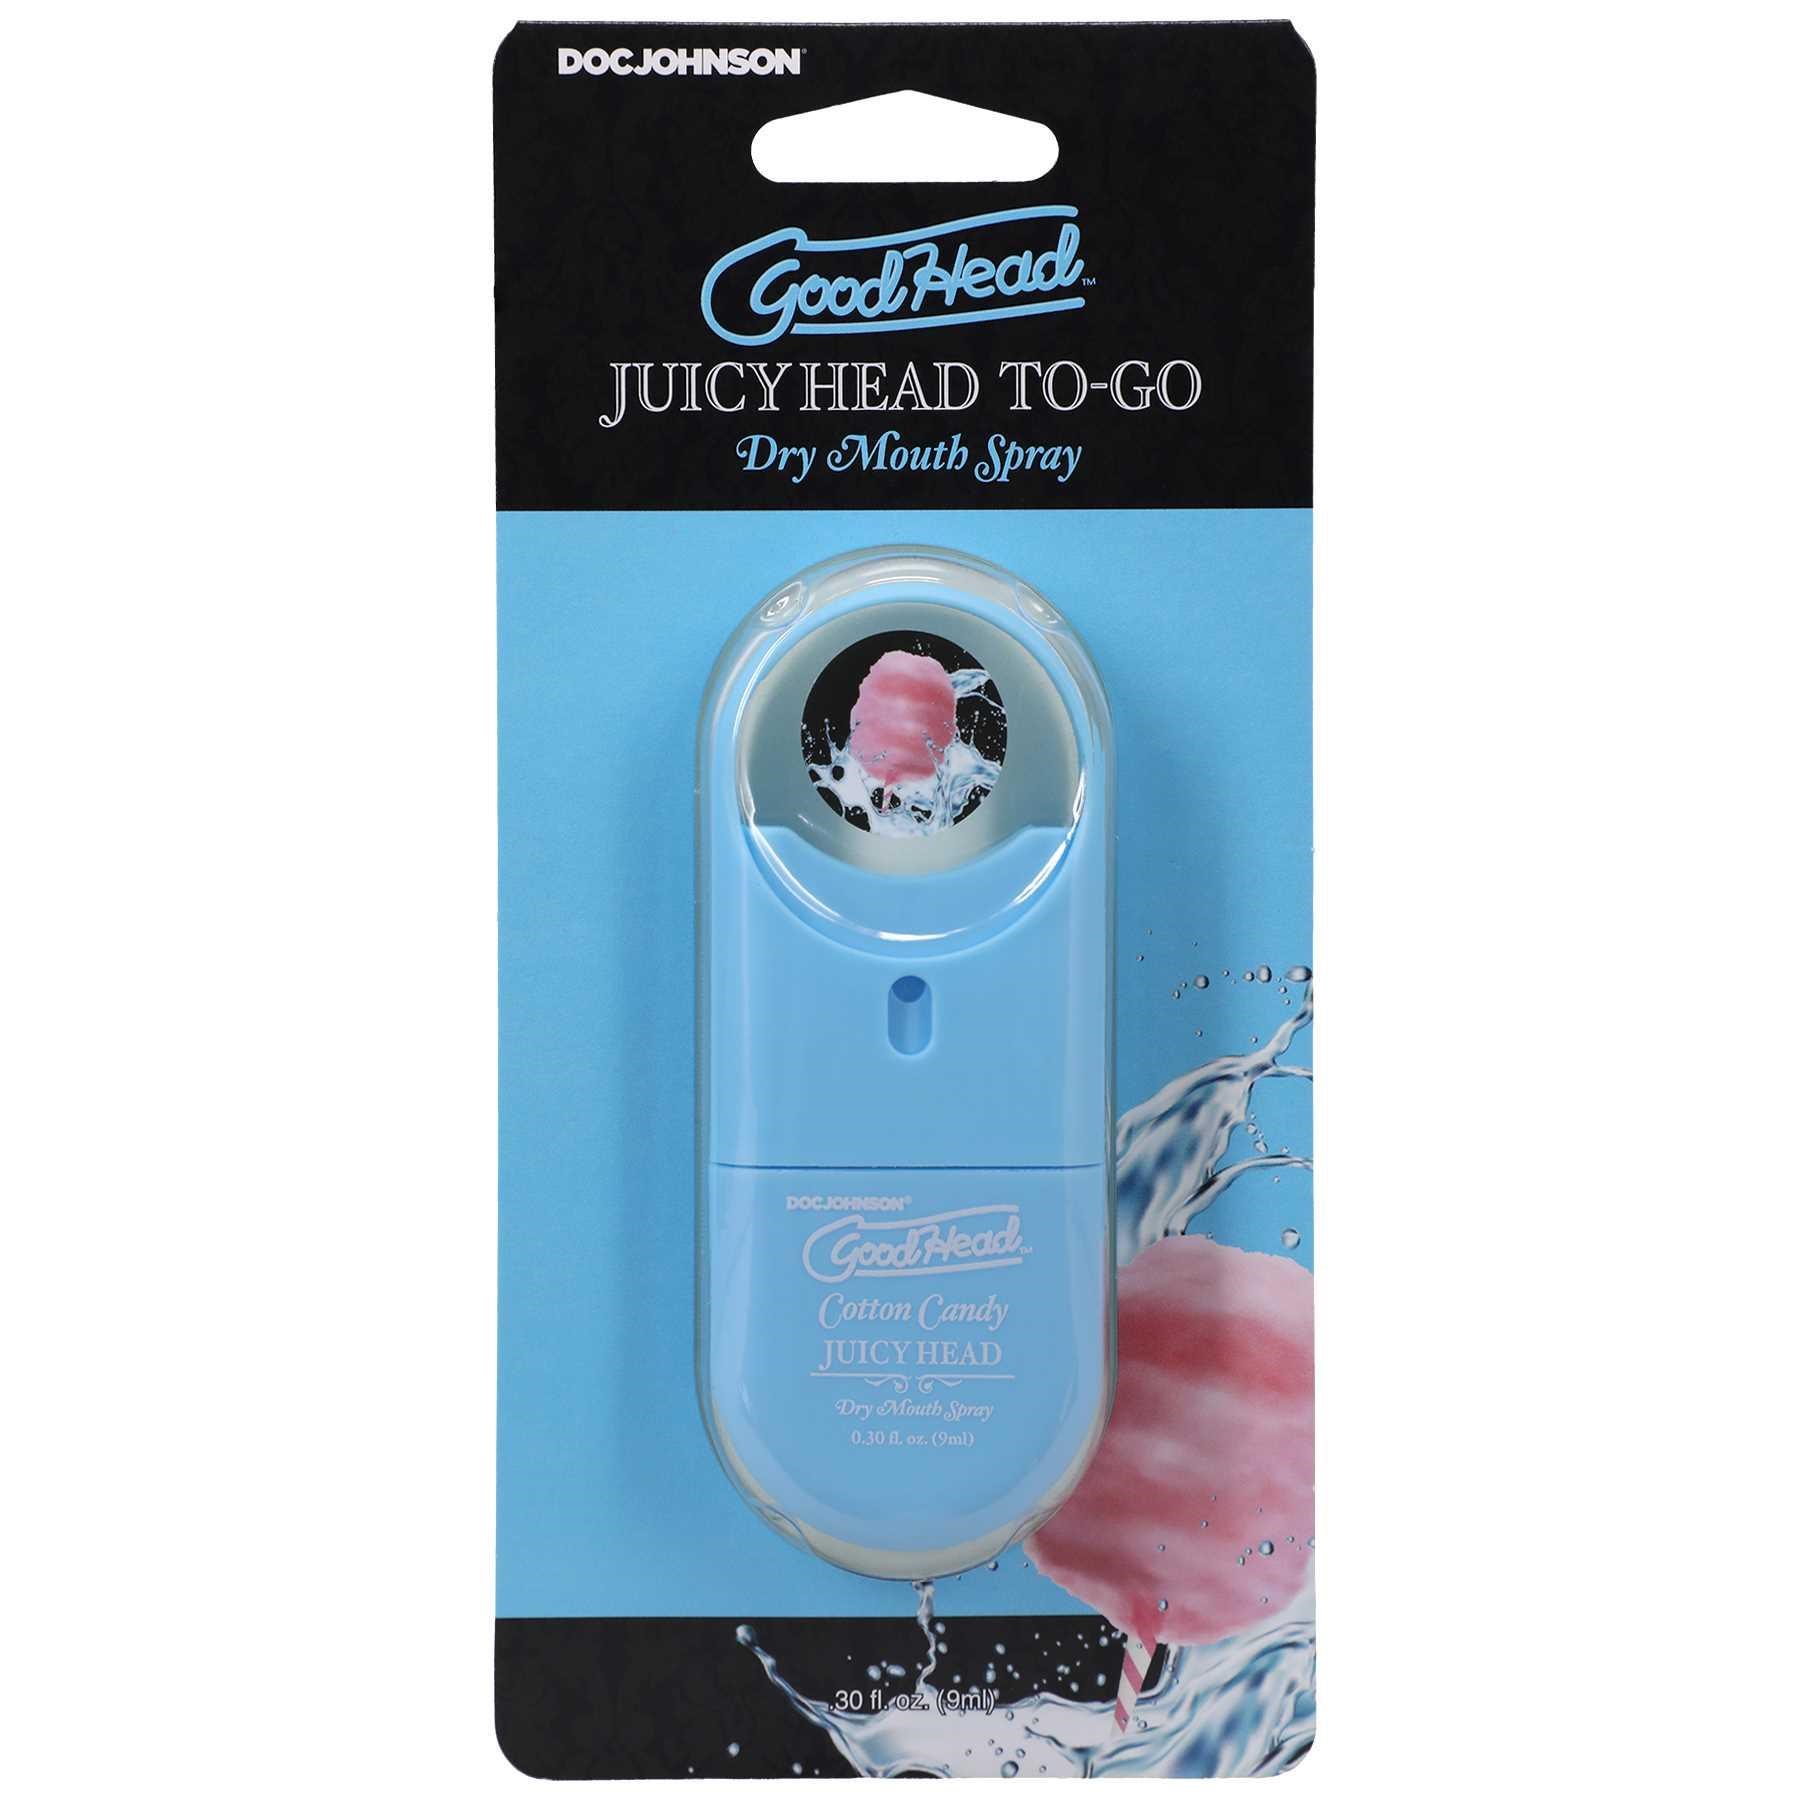 GoodHead - Juicy Head Dry Mouth Spray To-Go - Cotton Candy - .30 fl. oz. front package